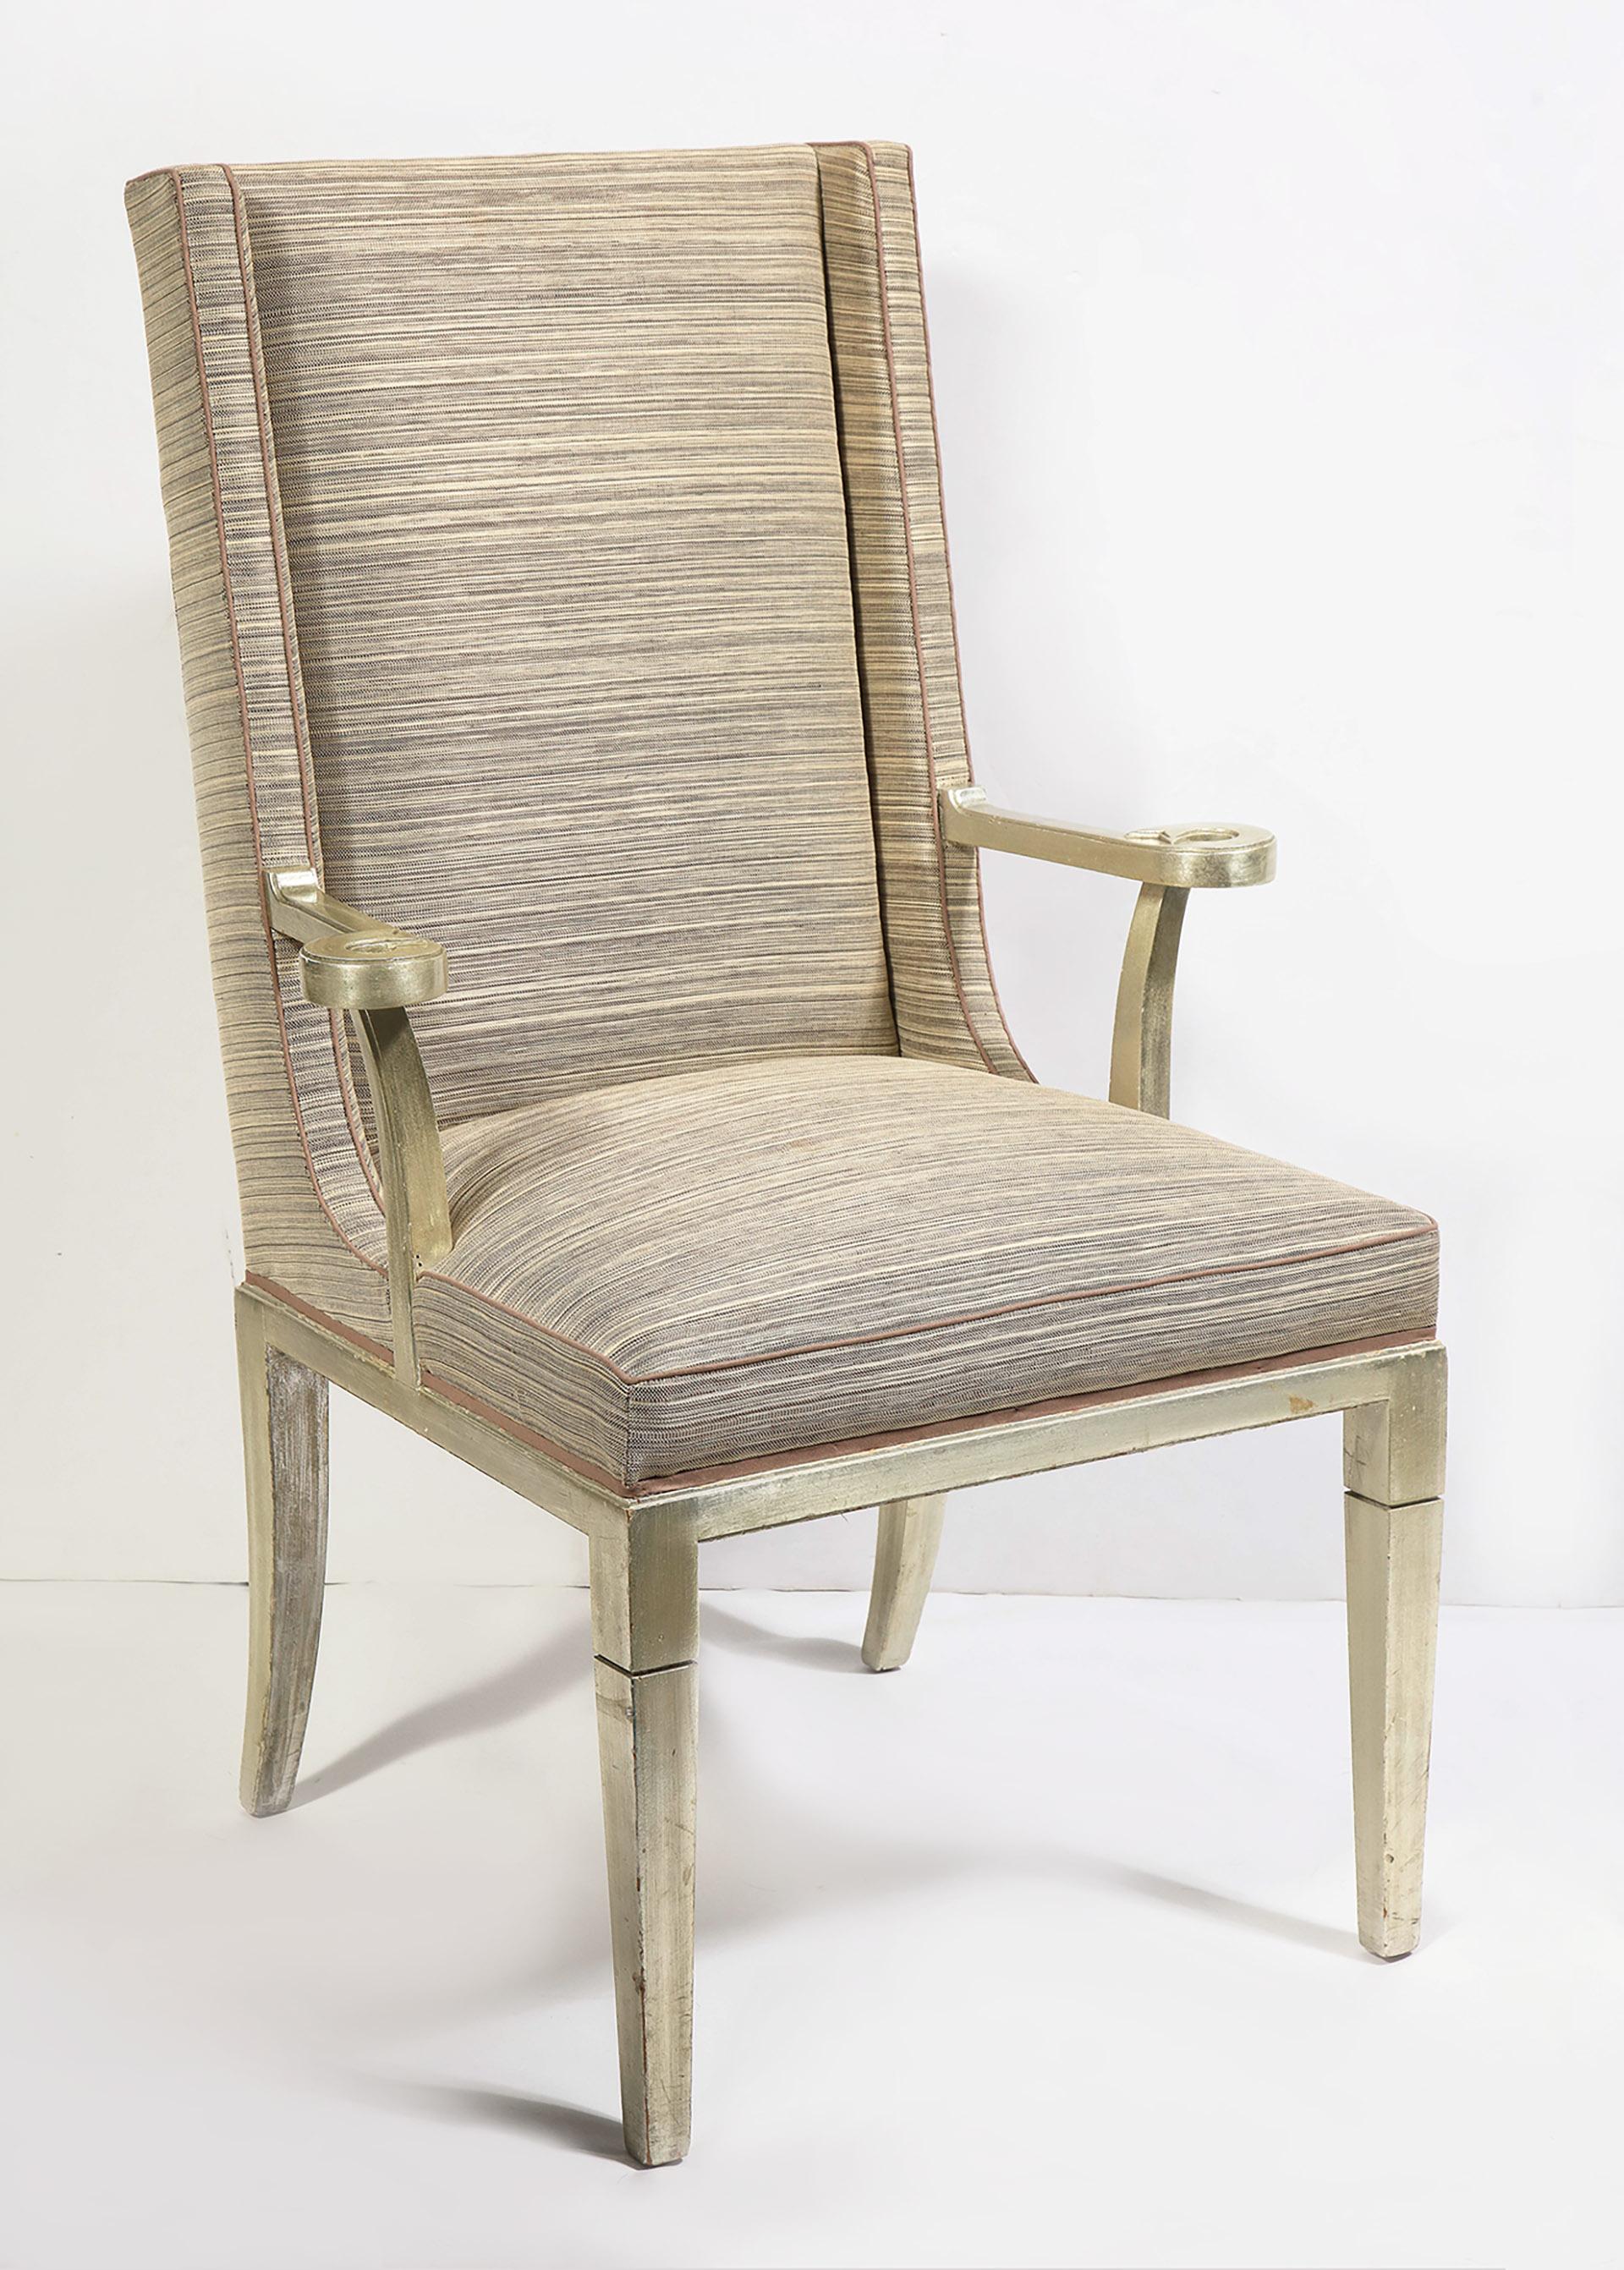 Pair of silver gilt high back arm chairs with new upholster, the out swept arms carved with arrow detail.